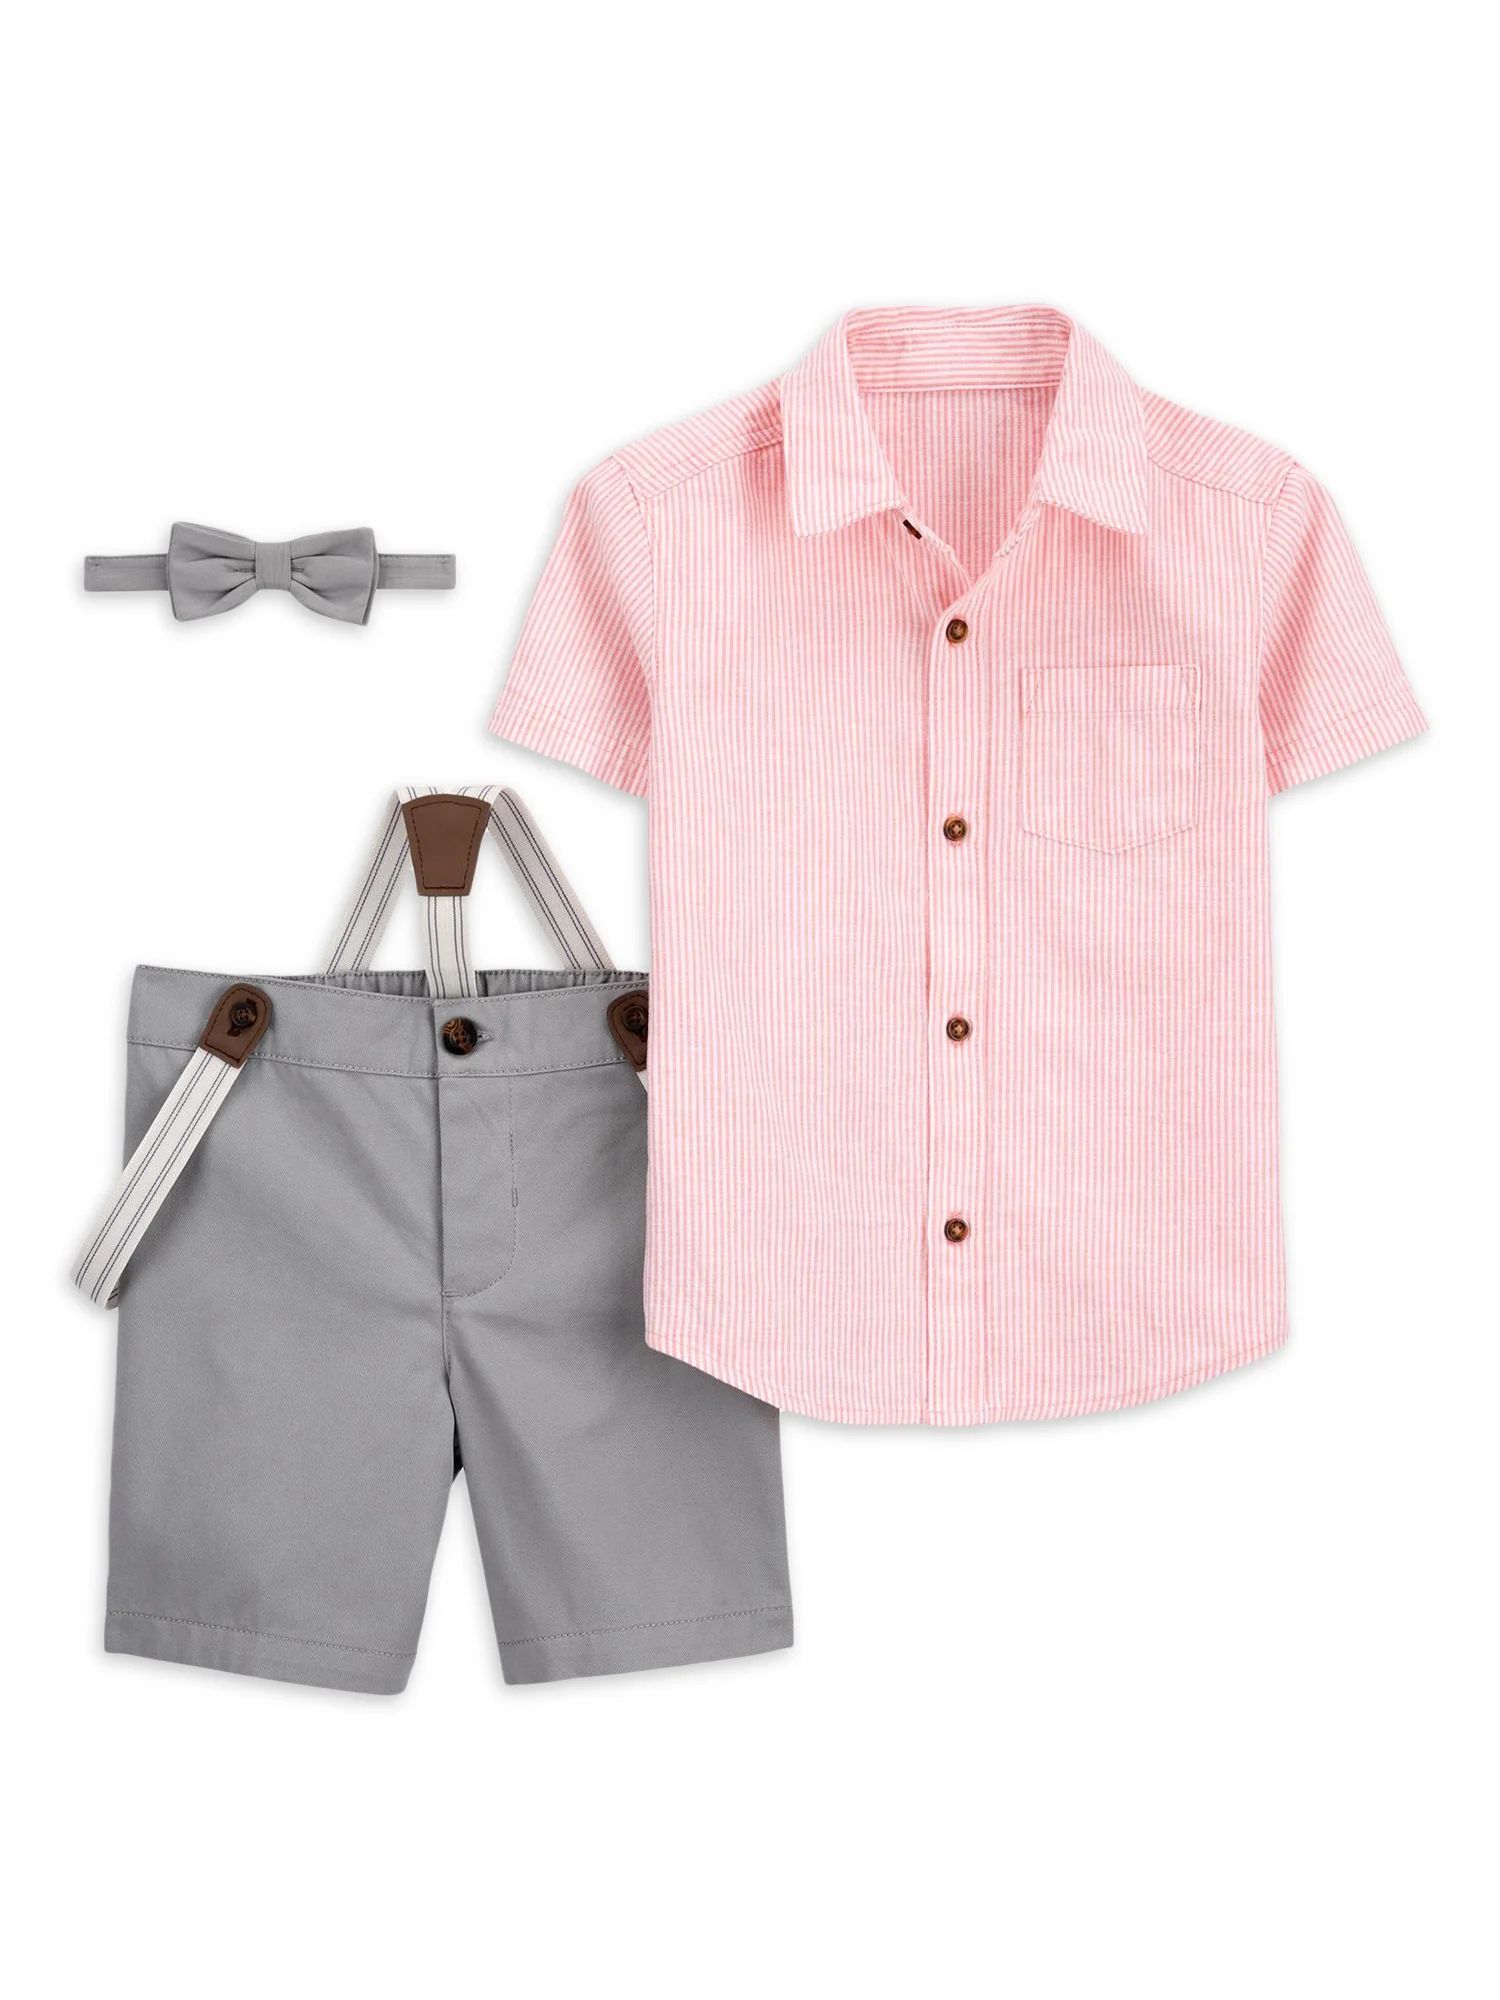 Carter's Child of Mine Toddler Boy Outfit Set, 2-Piece, Sizes 2T-5T | Walmart (US)